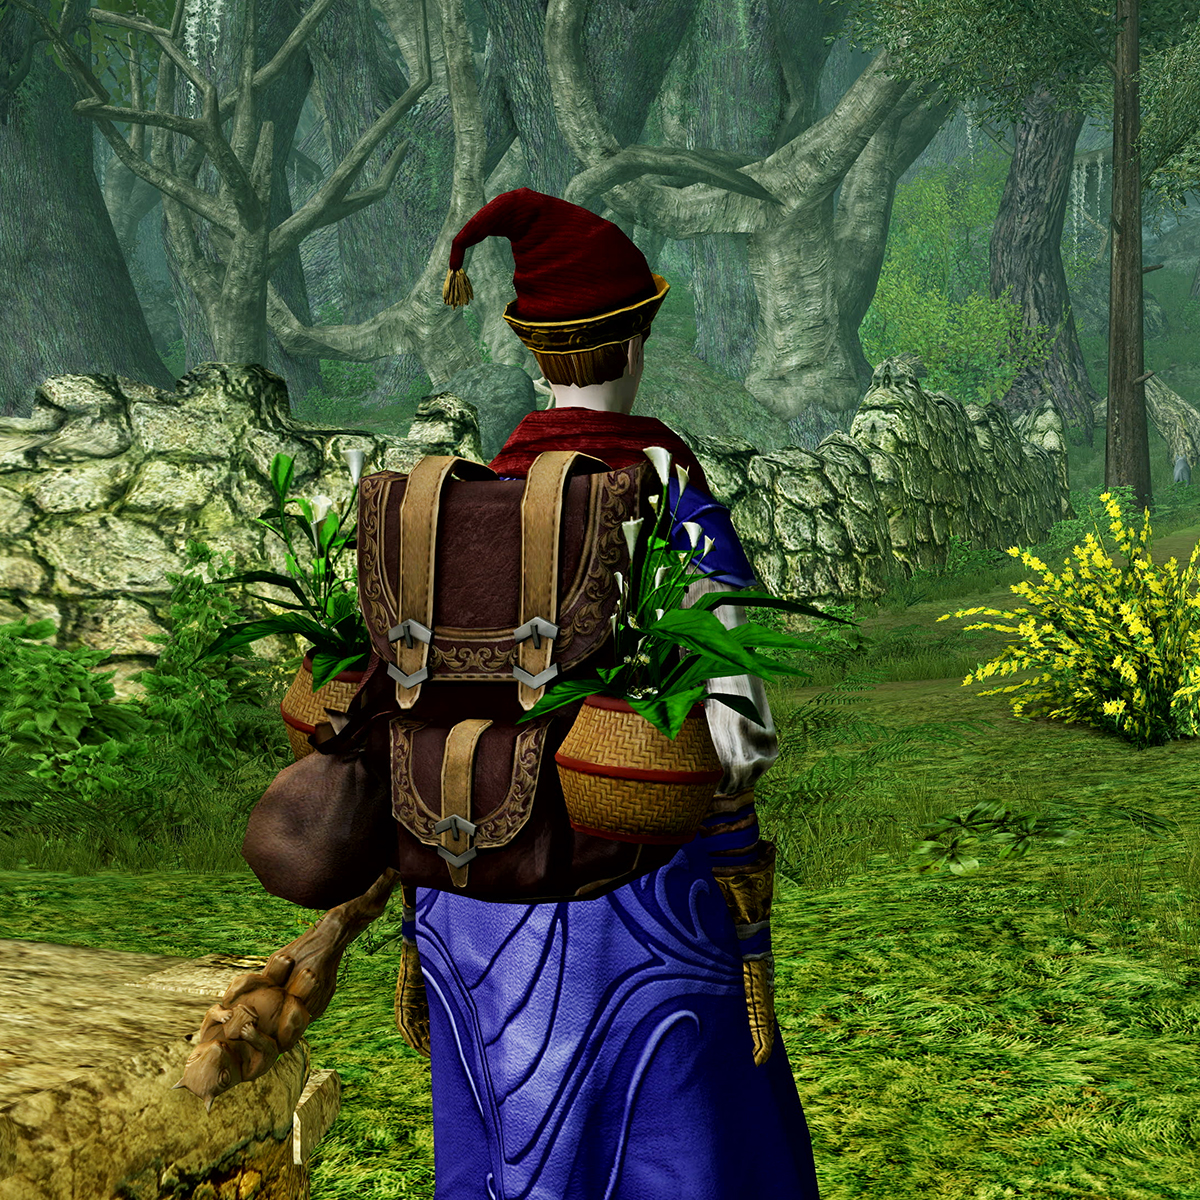 The Whimsical Patron’s Coffer is available in the LOTRO Store through May 26th! Get more information about this new limited time offer on LOTRO.com: lotro.com/news/lotro-whi… #LOTRO